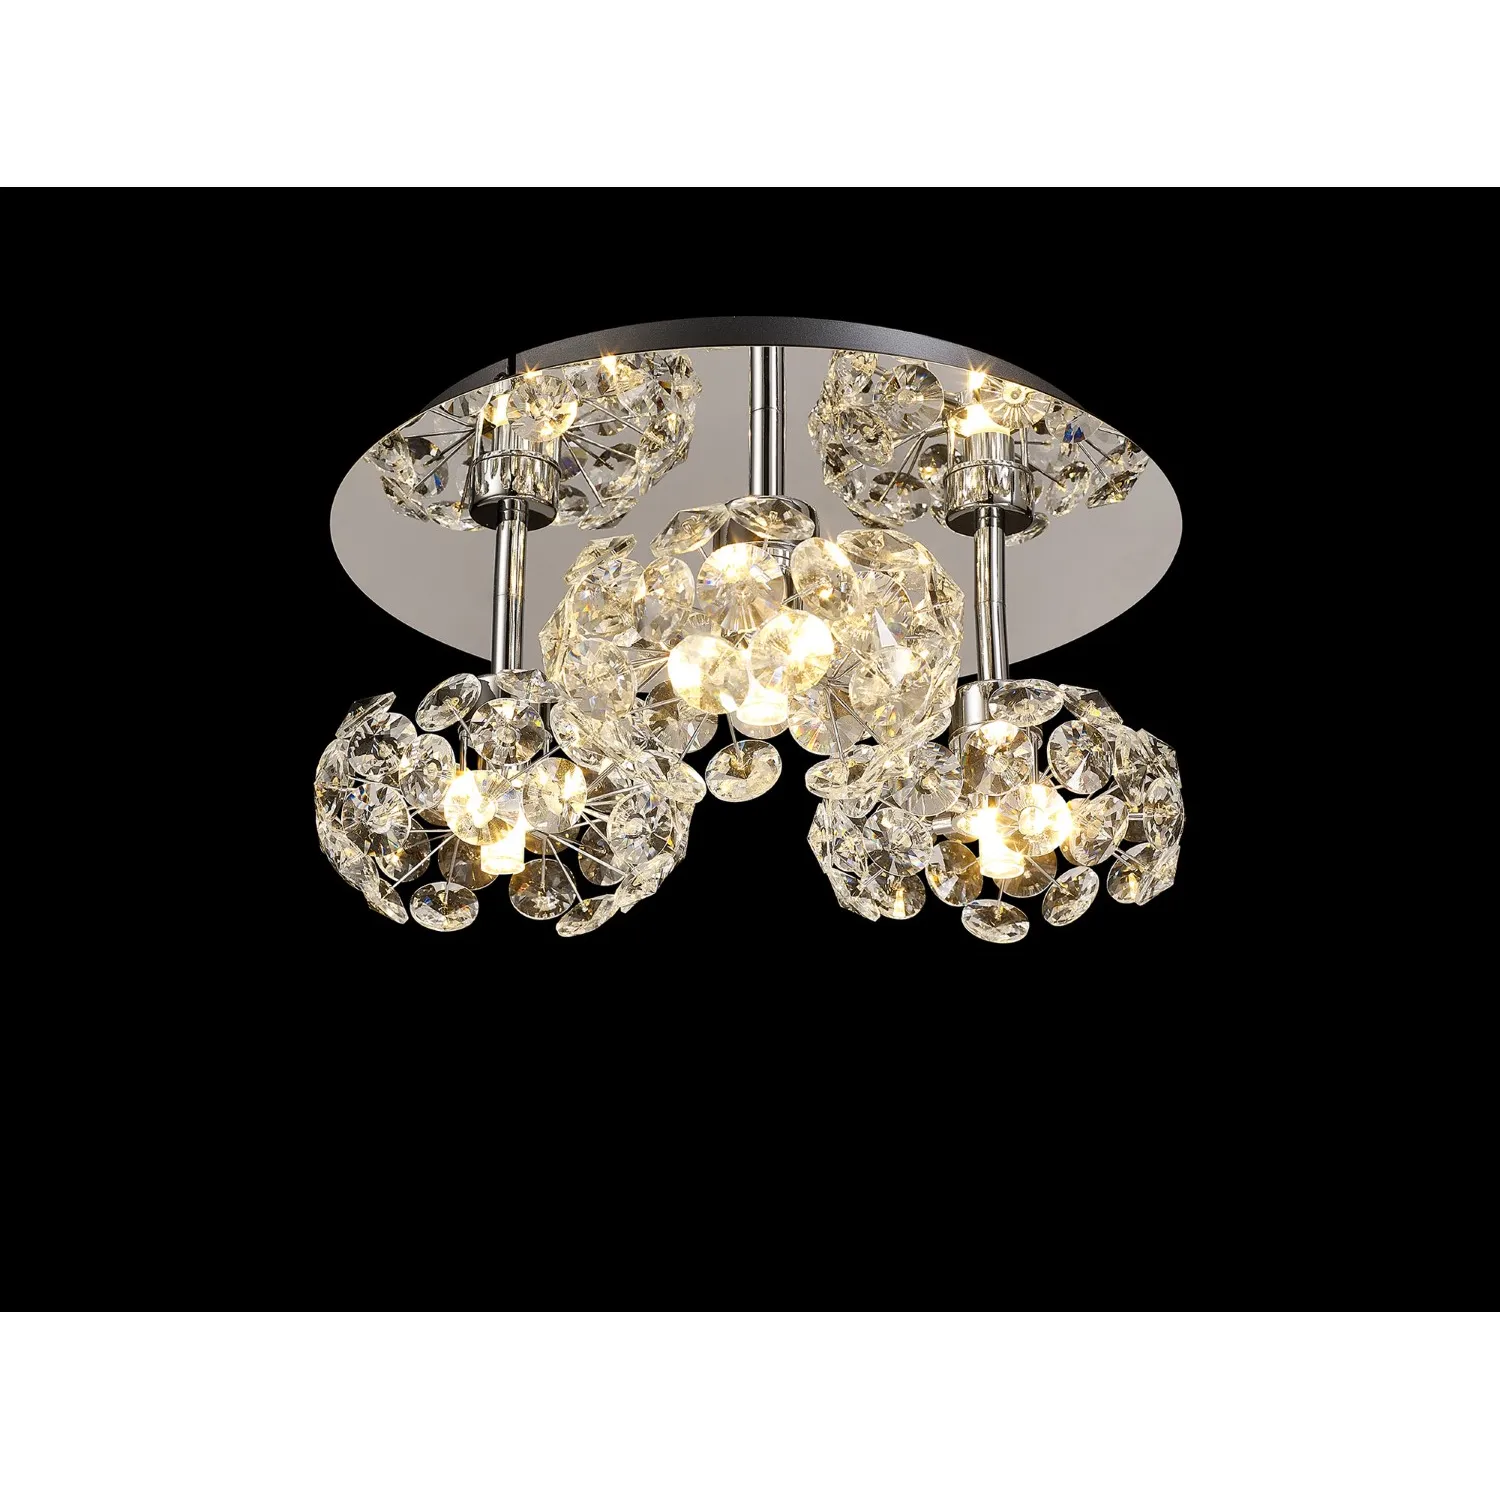 Camden Round 3 Light G9 35cm Flush Light With Polished Chrome And Crystal Shade